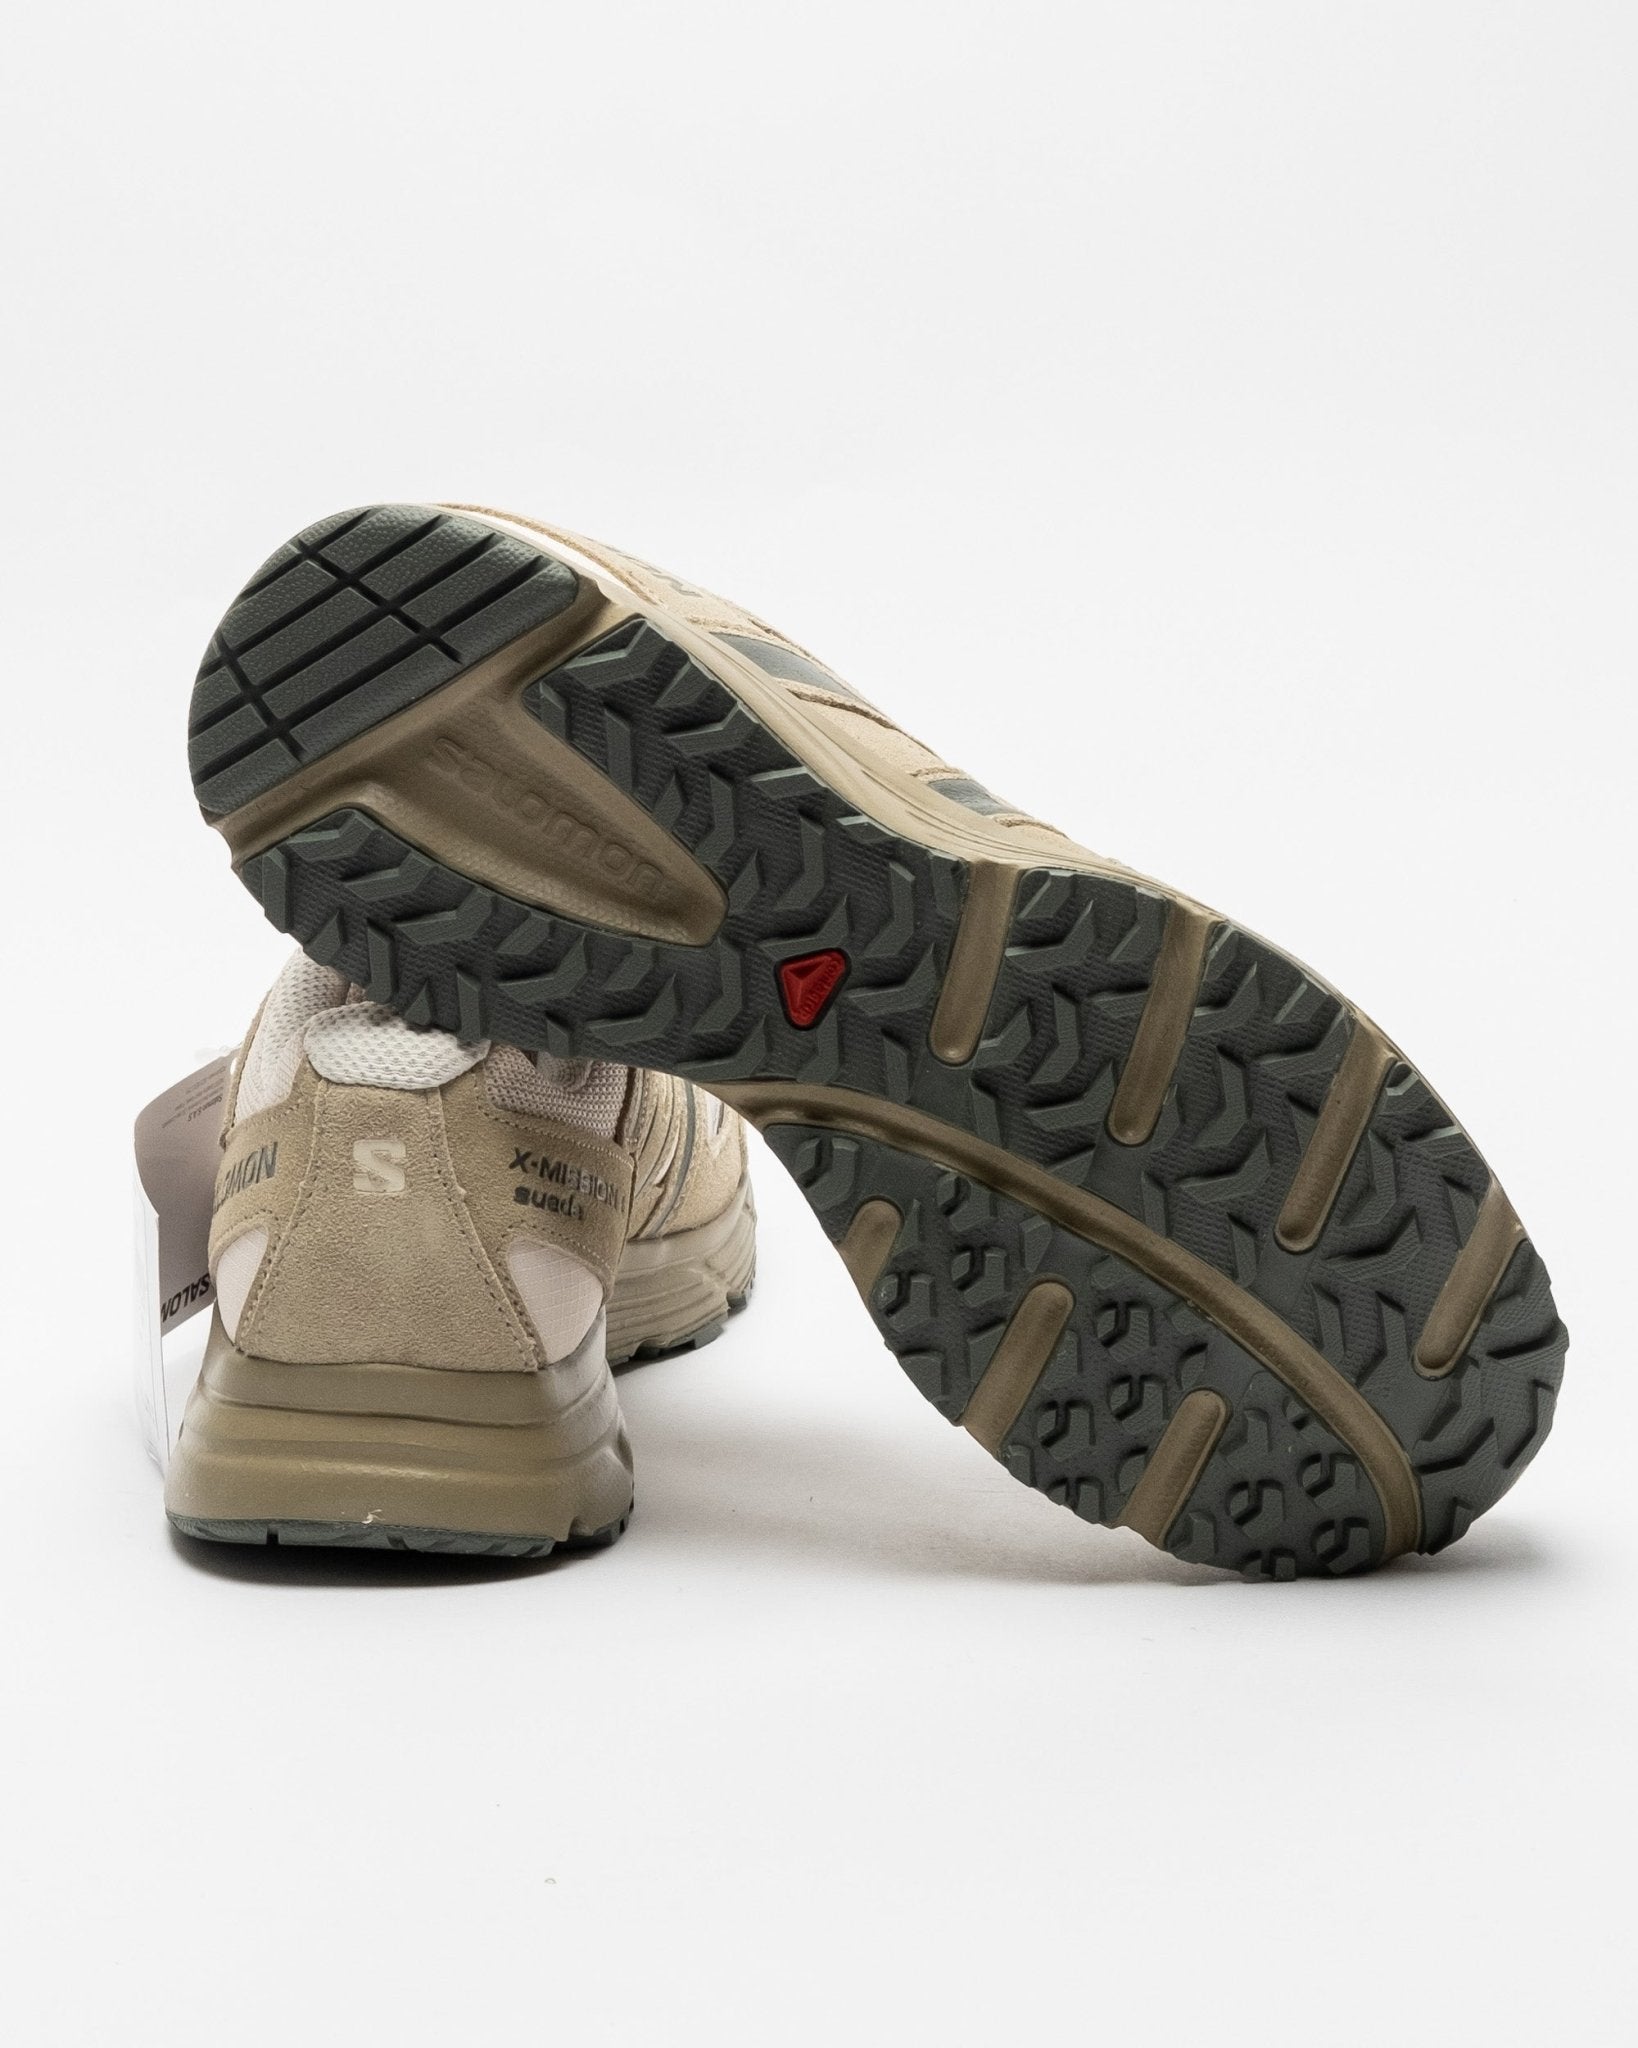 X-Mission 4 Suede Turtledove/Moss Gray/Castor Gray - Meadow